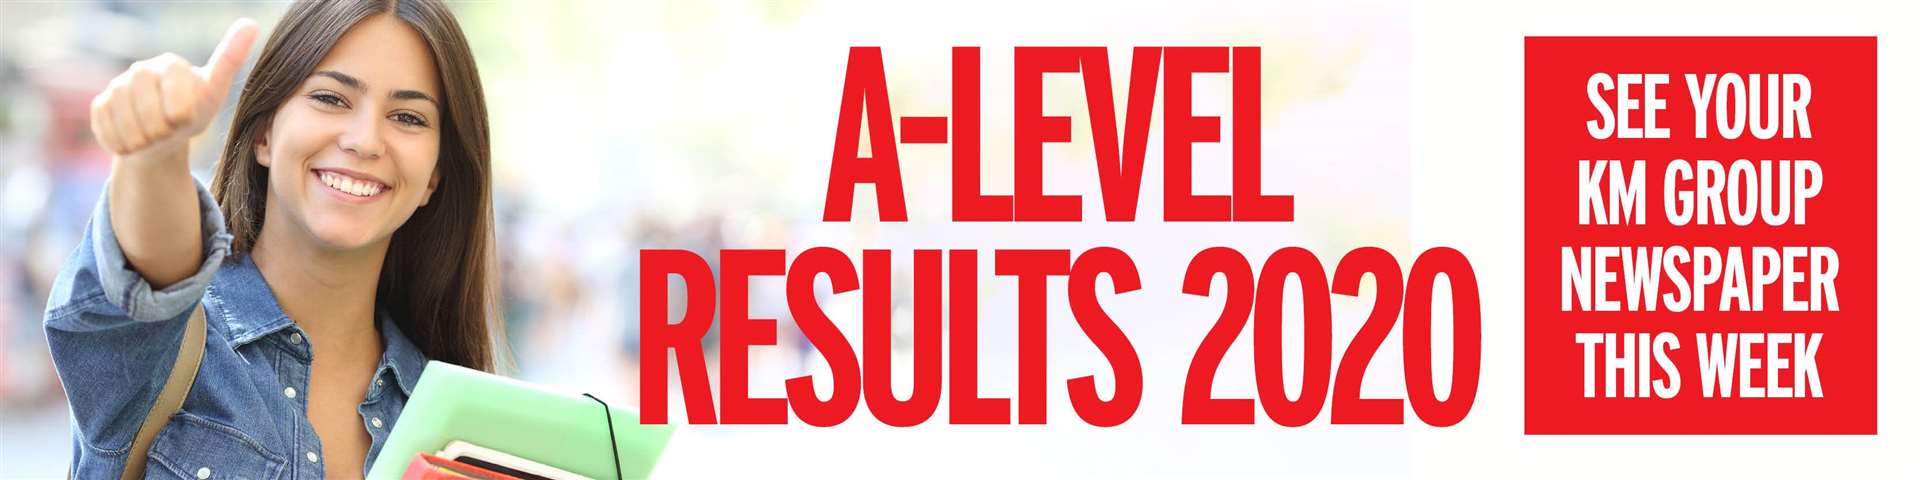 A-level results day 2020